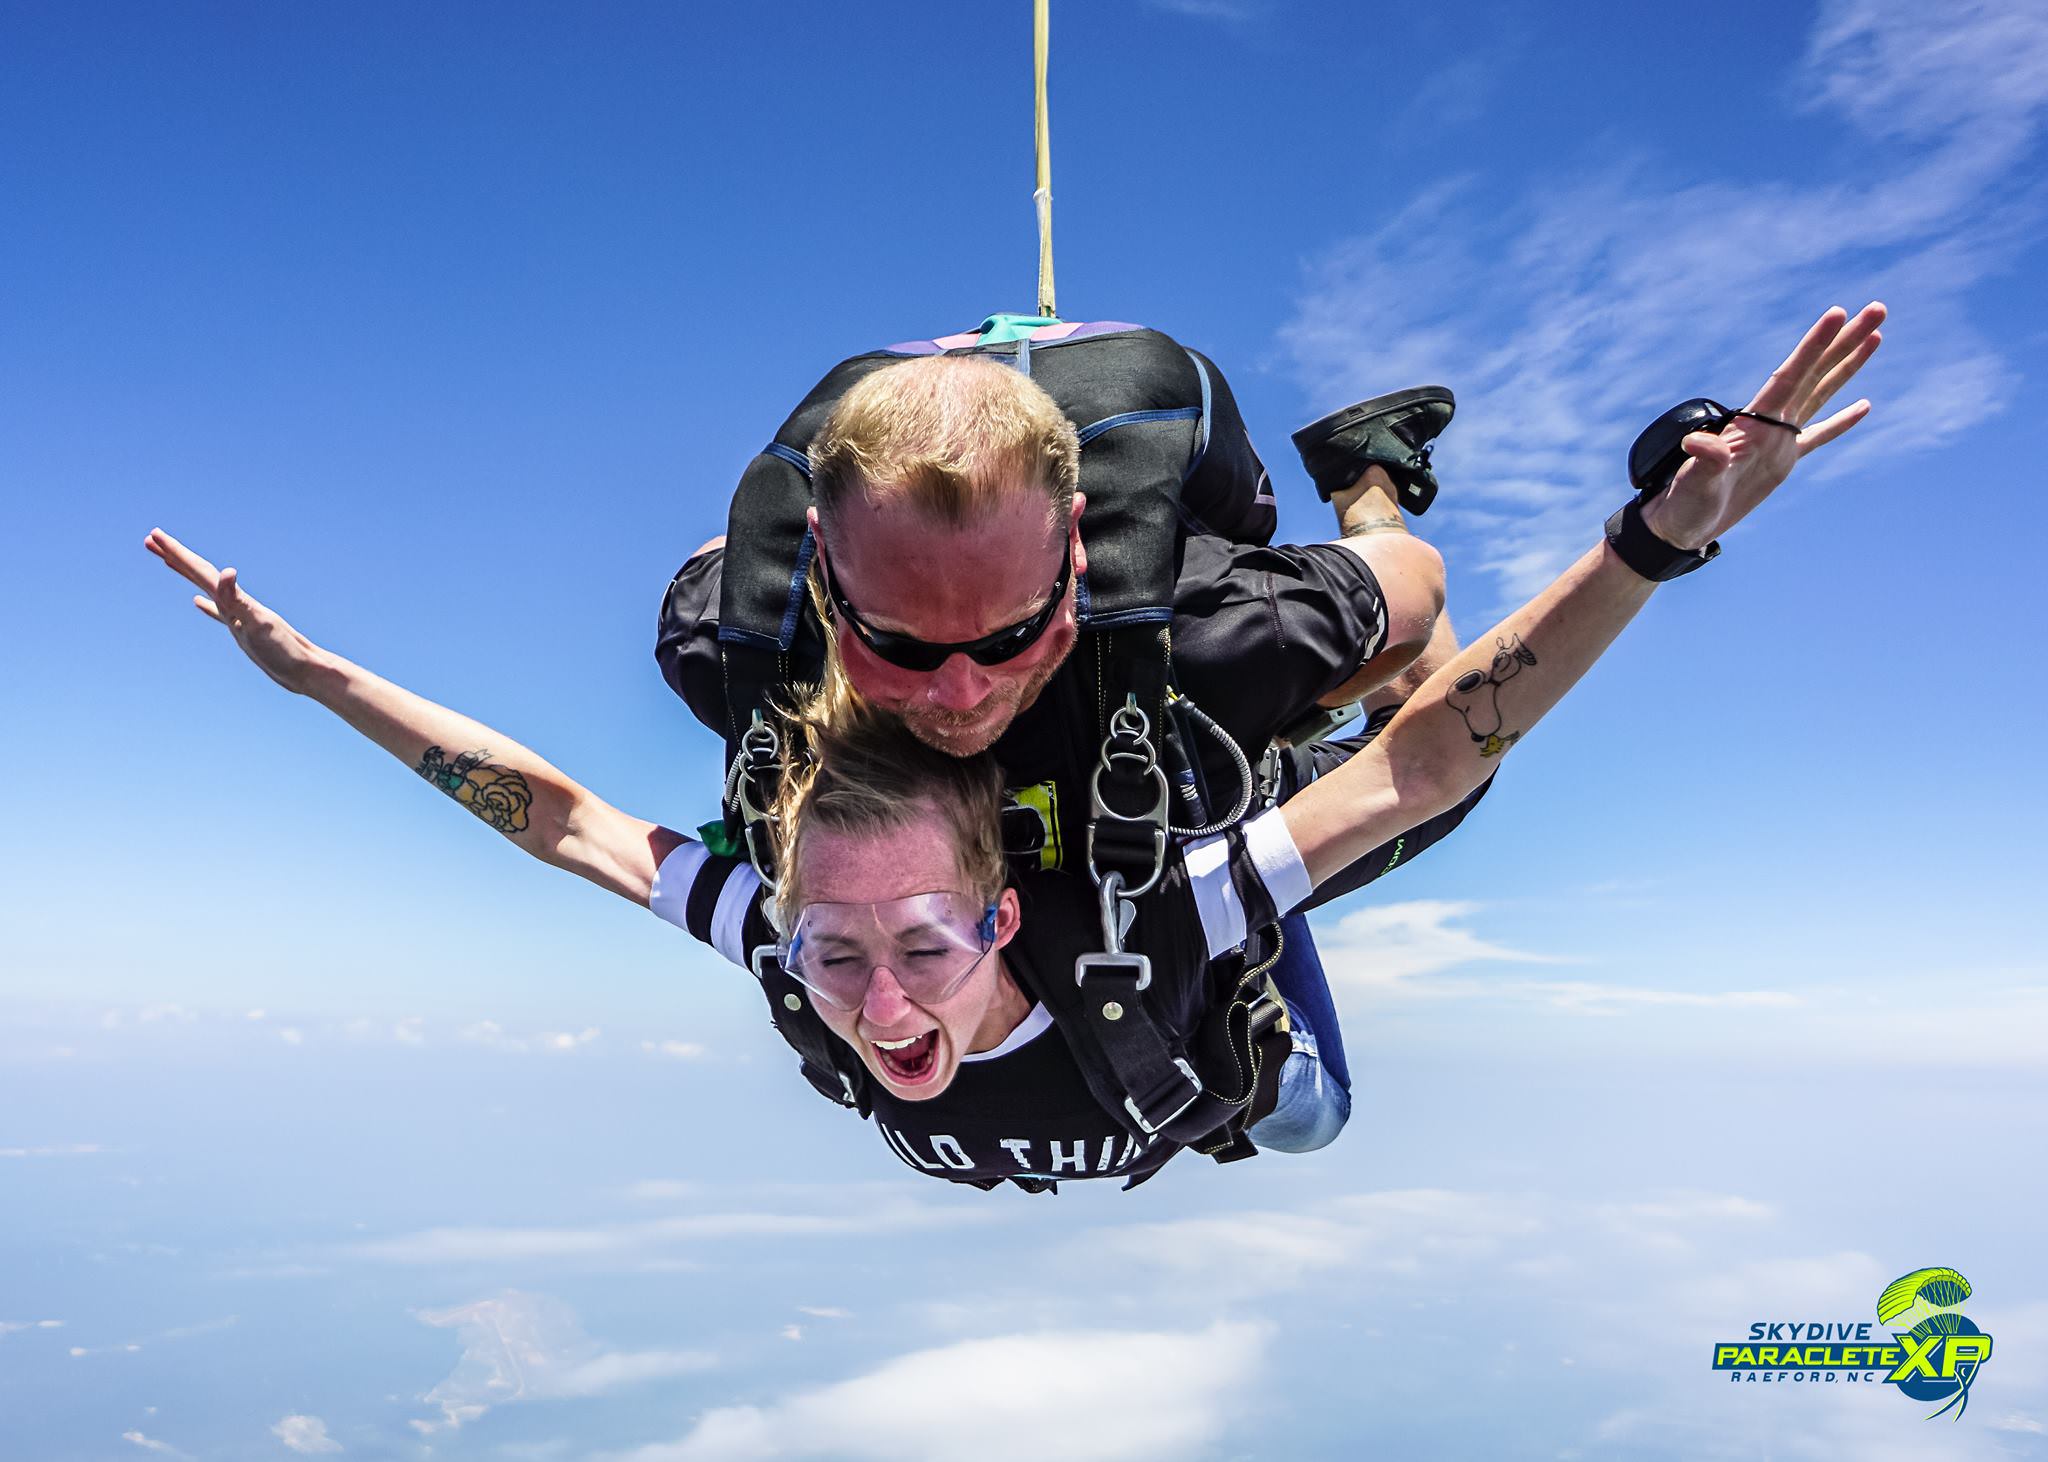 How High Are Skydiving Jumps? Skydive Paraclete XP